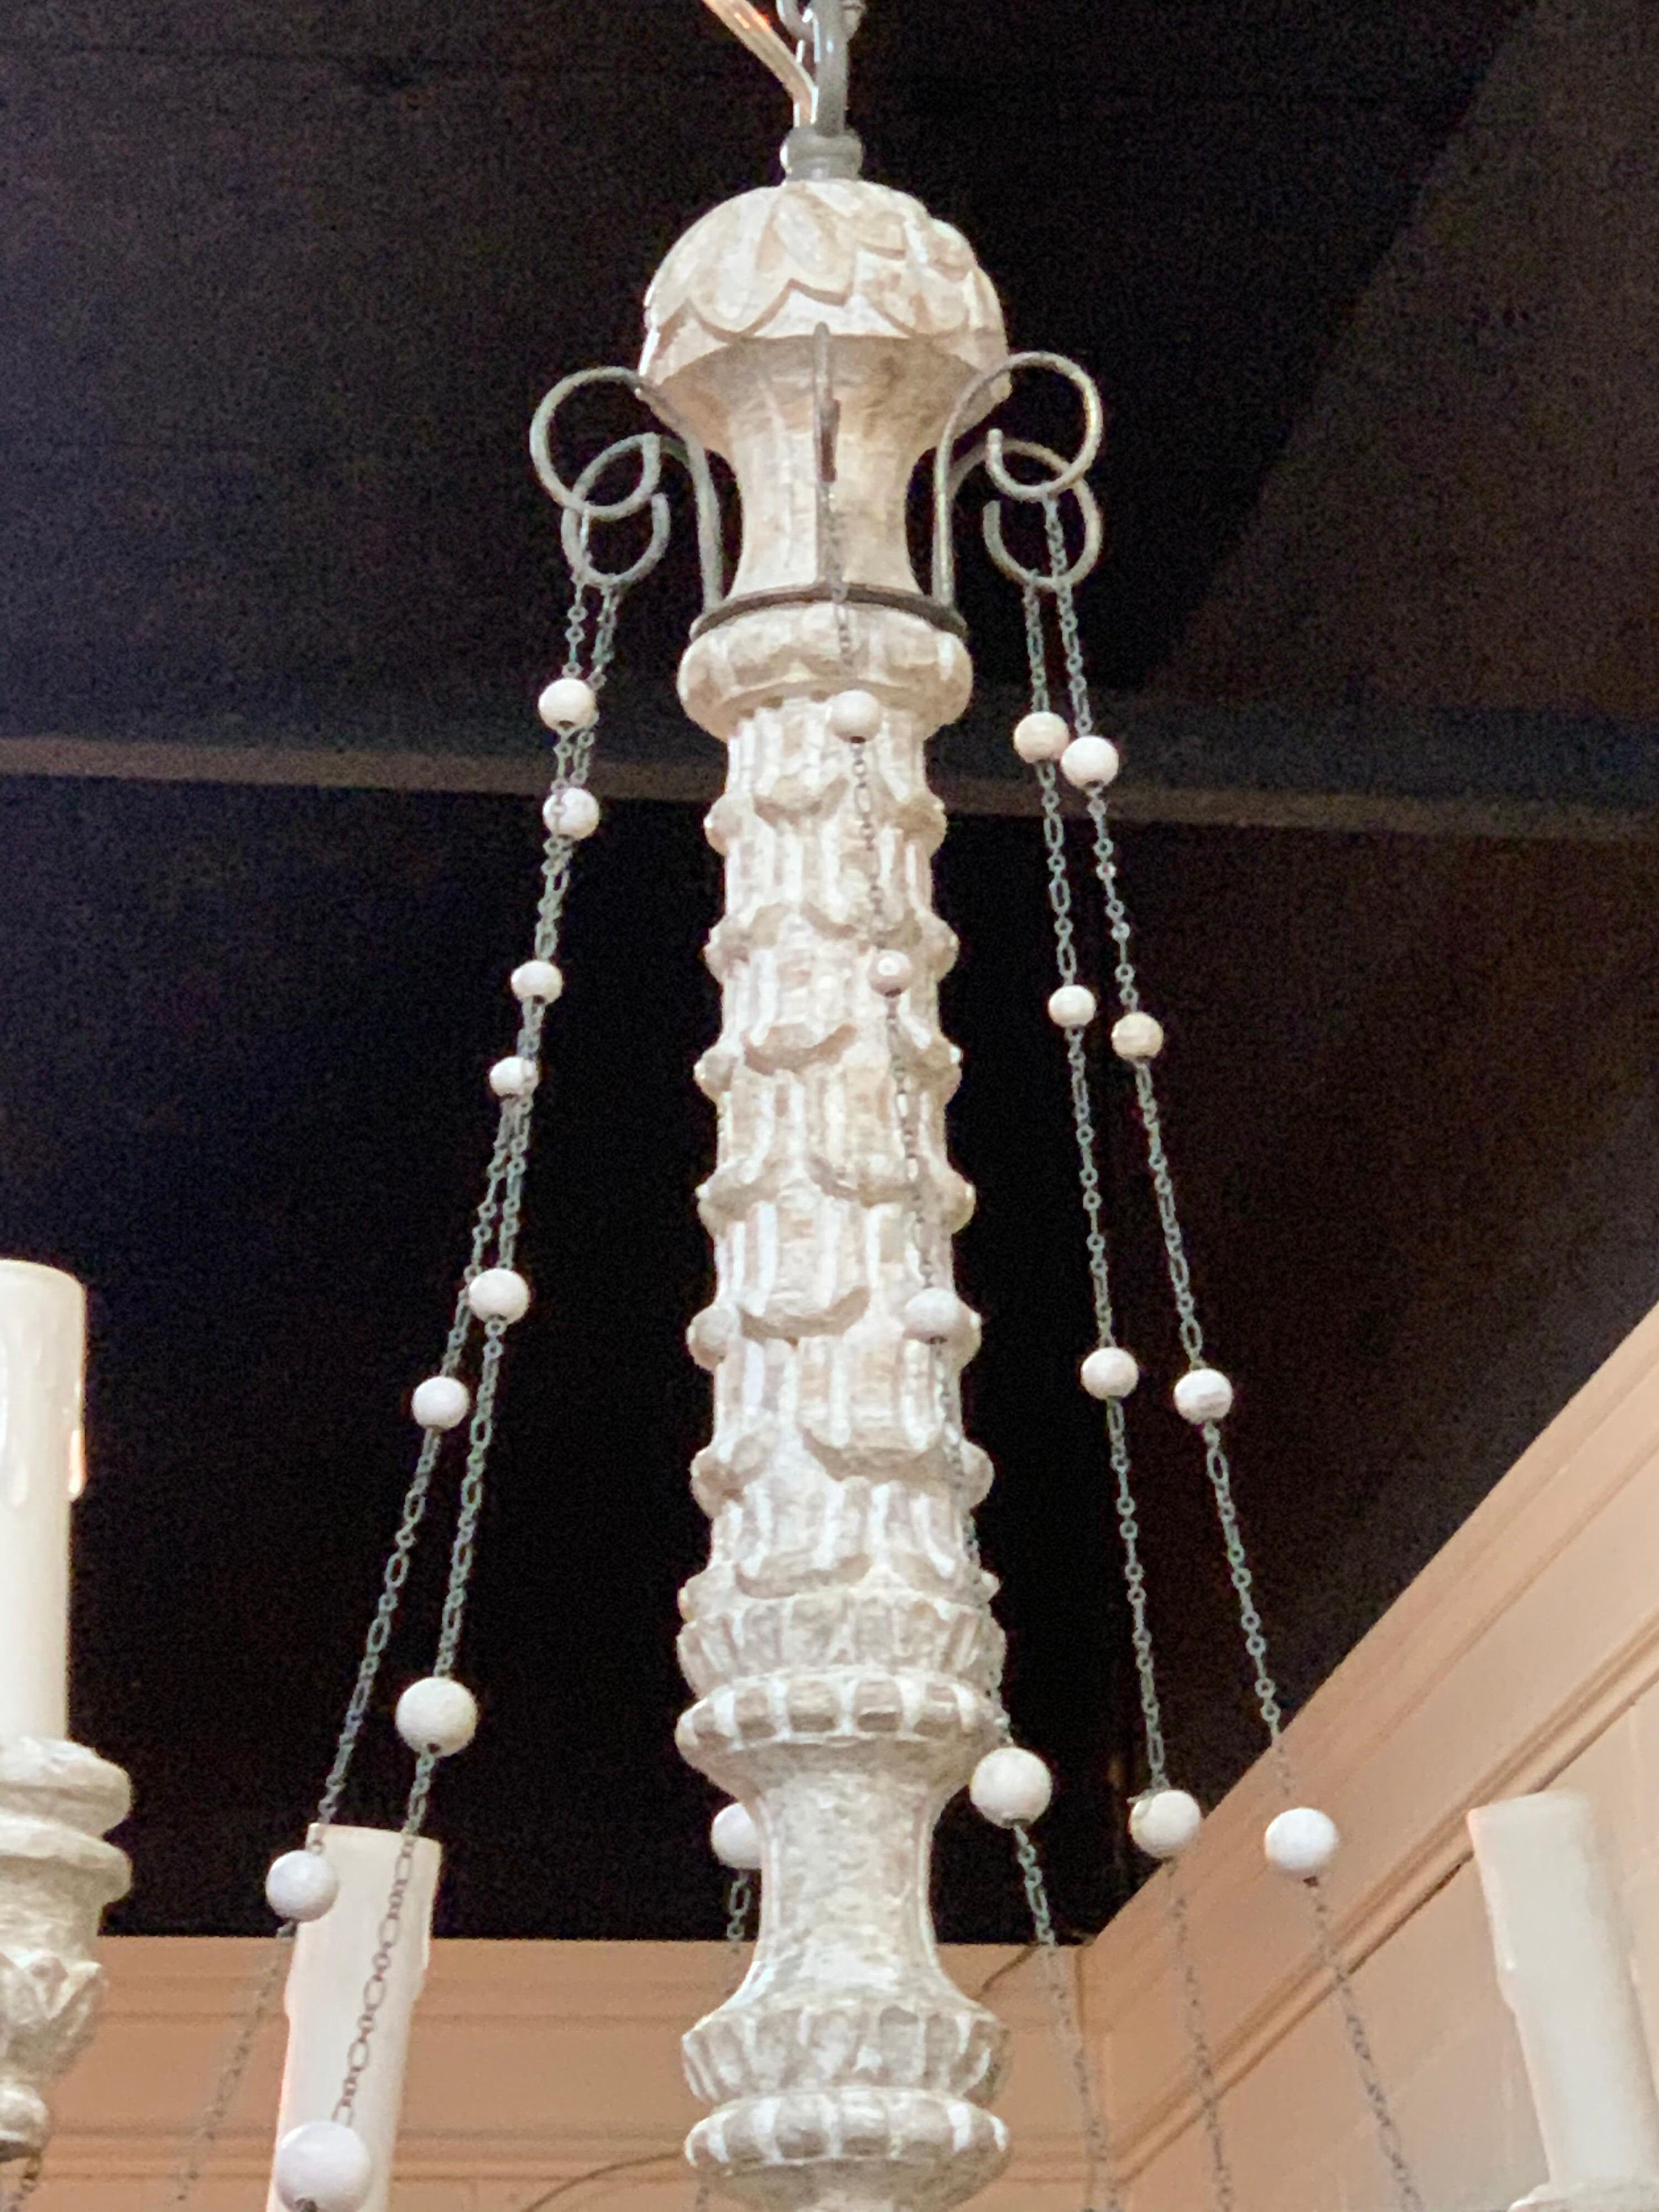 Lovely Italian style carved and painted chandelier with 6 lights. Very nice carvings and patina on this fixture. Would mix well with a variety of decors.